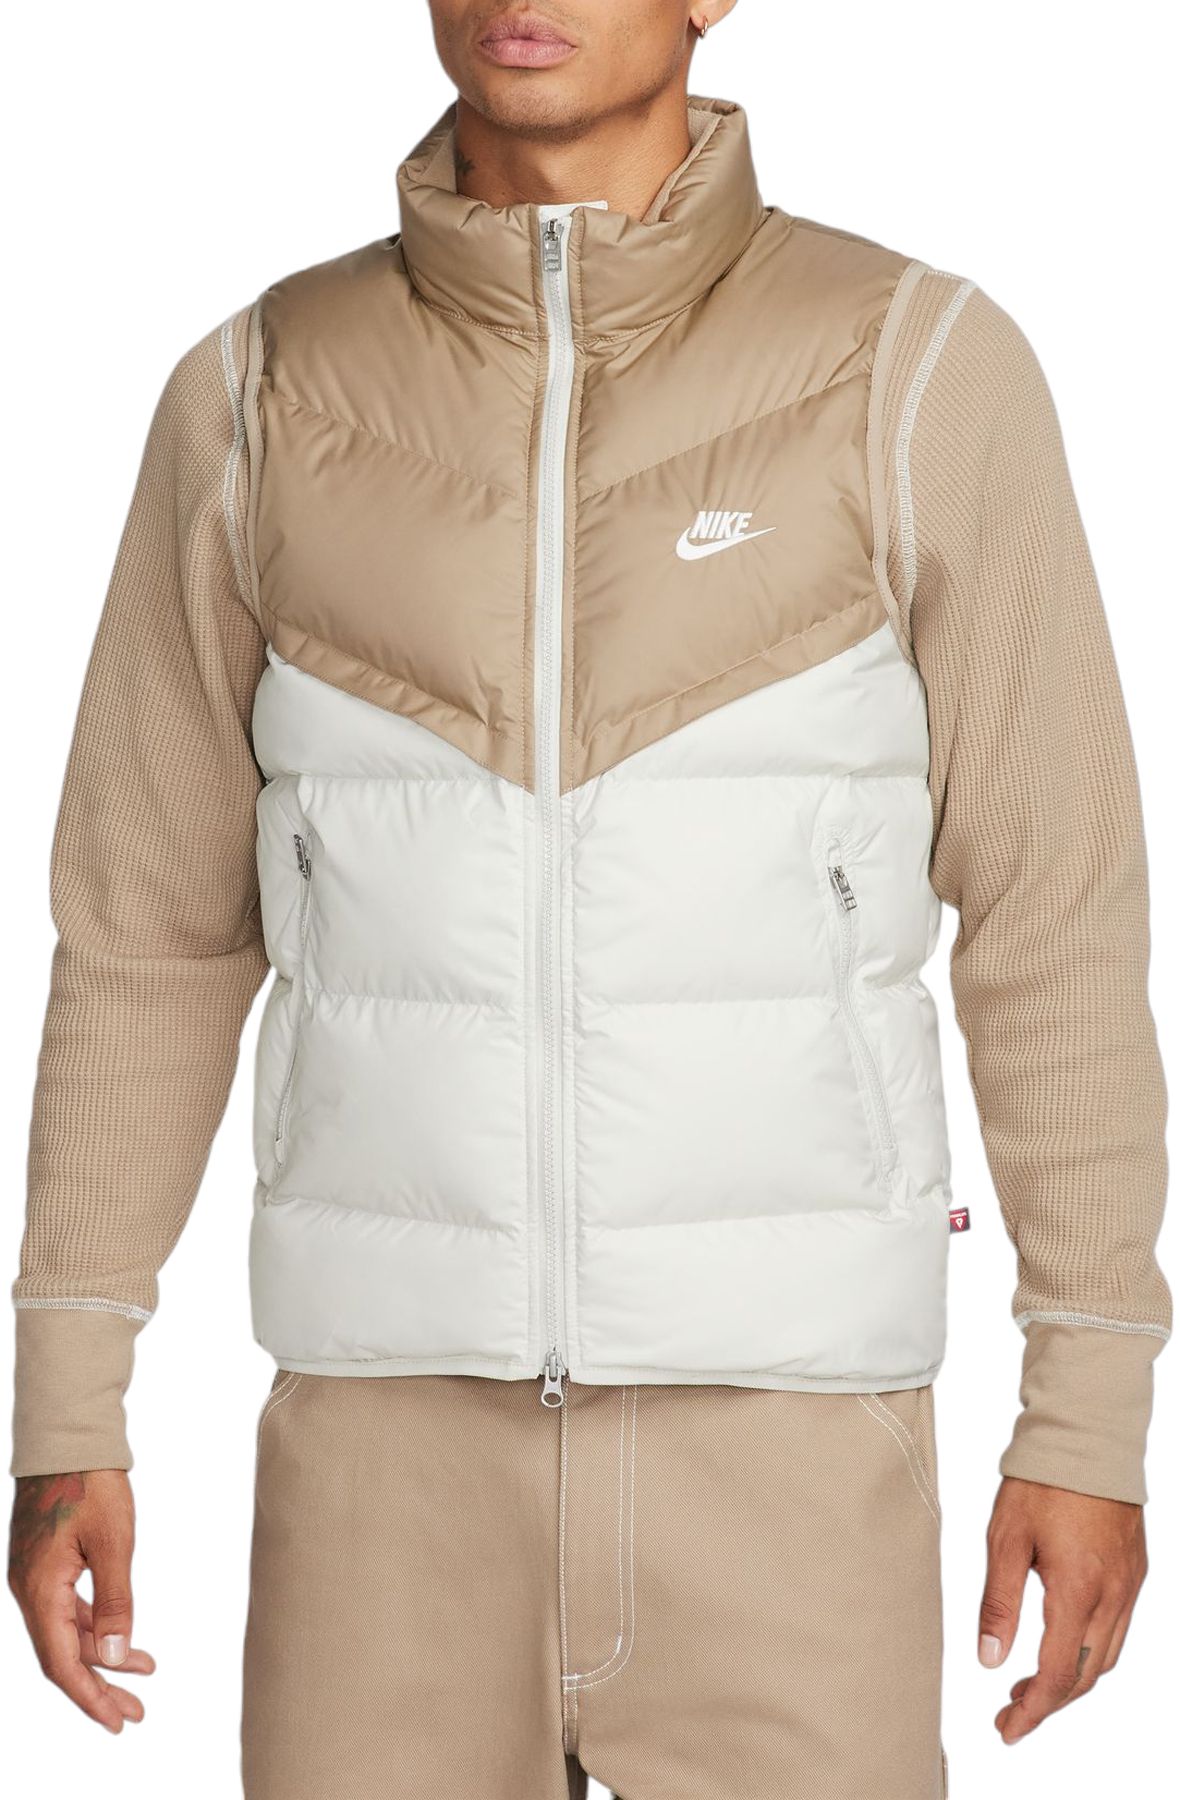 NIKE Storm-FIT Windrunner Insulated Vest FB8193 247 - Shiekh